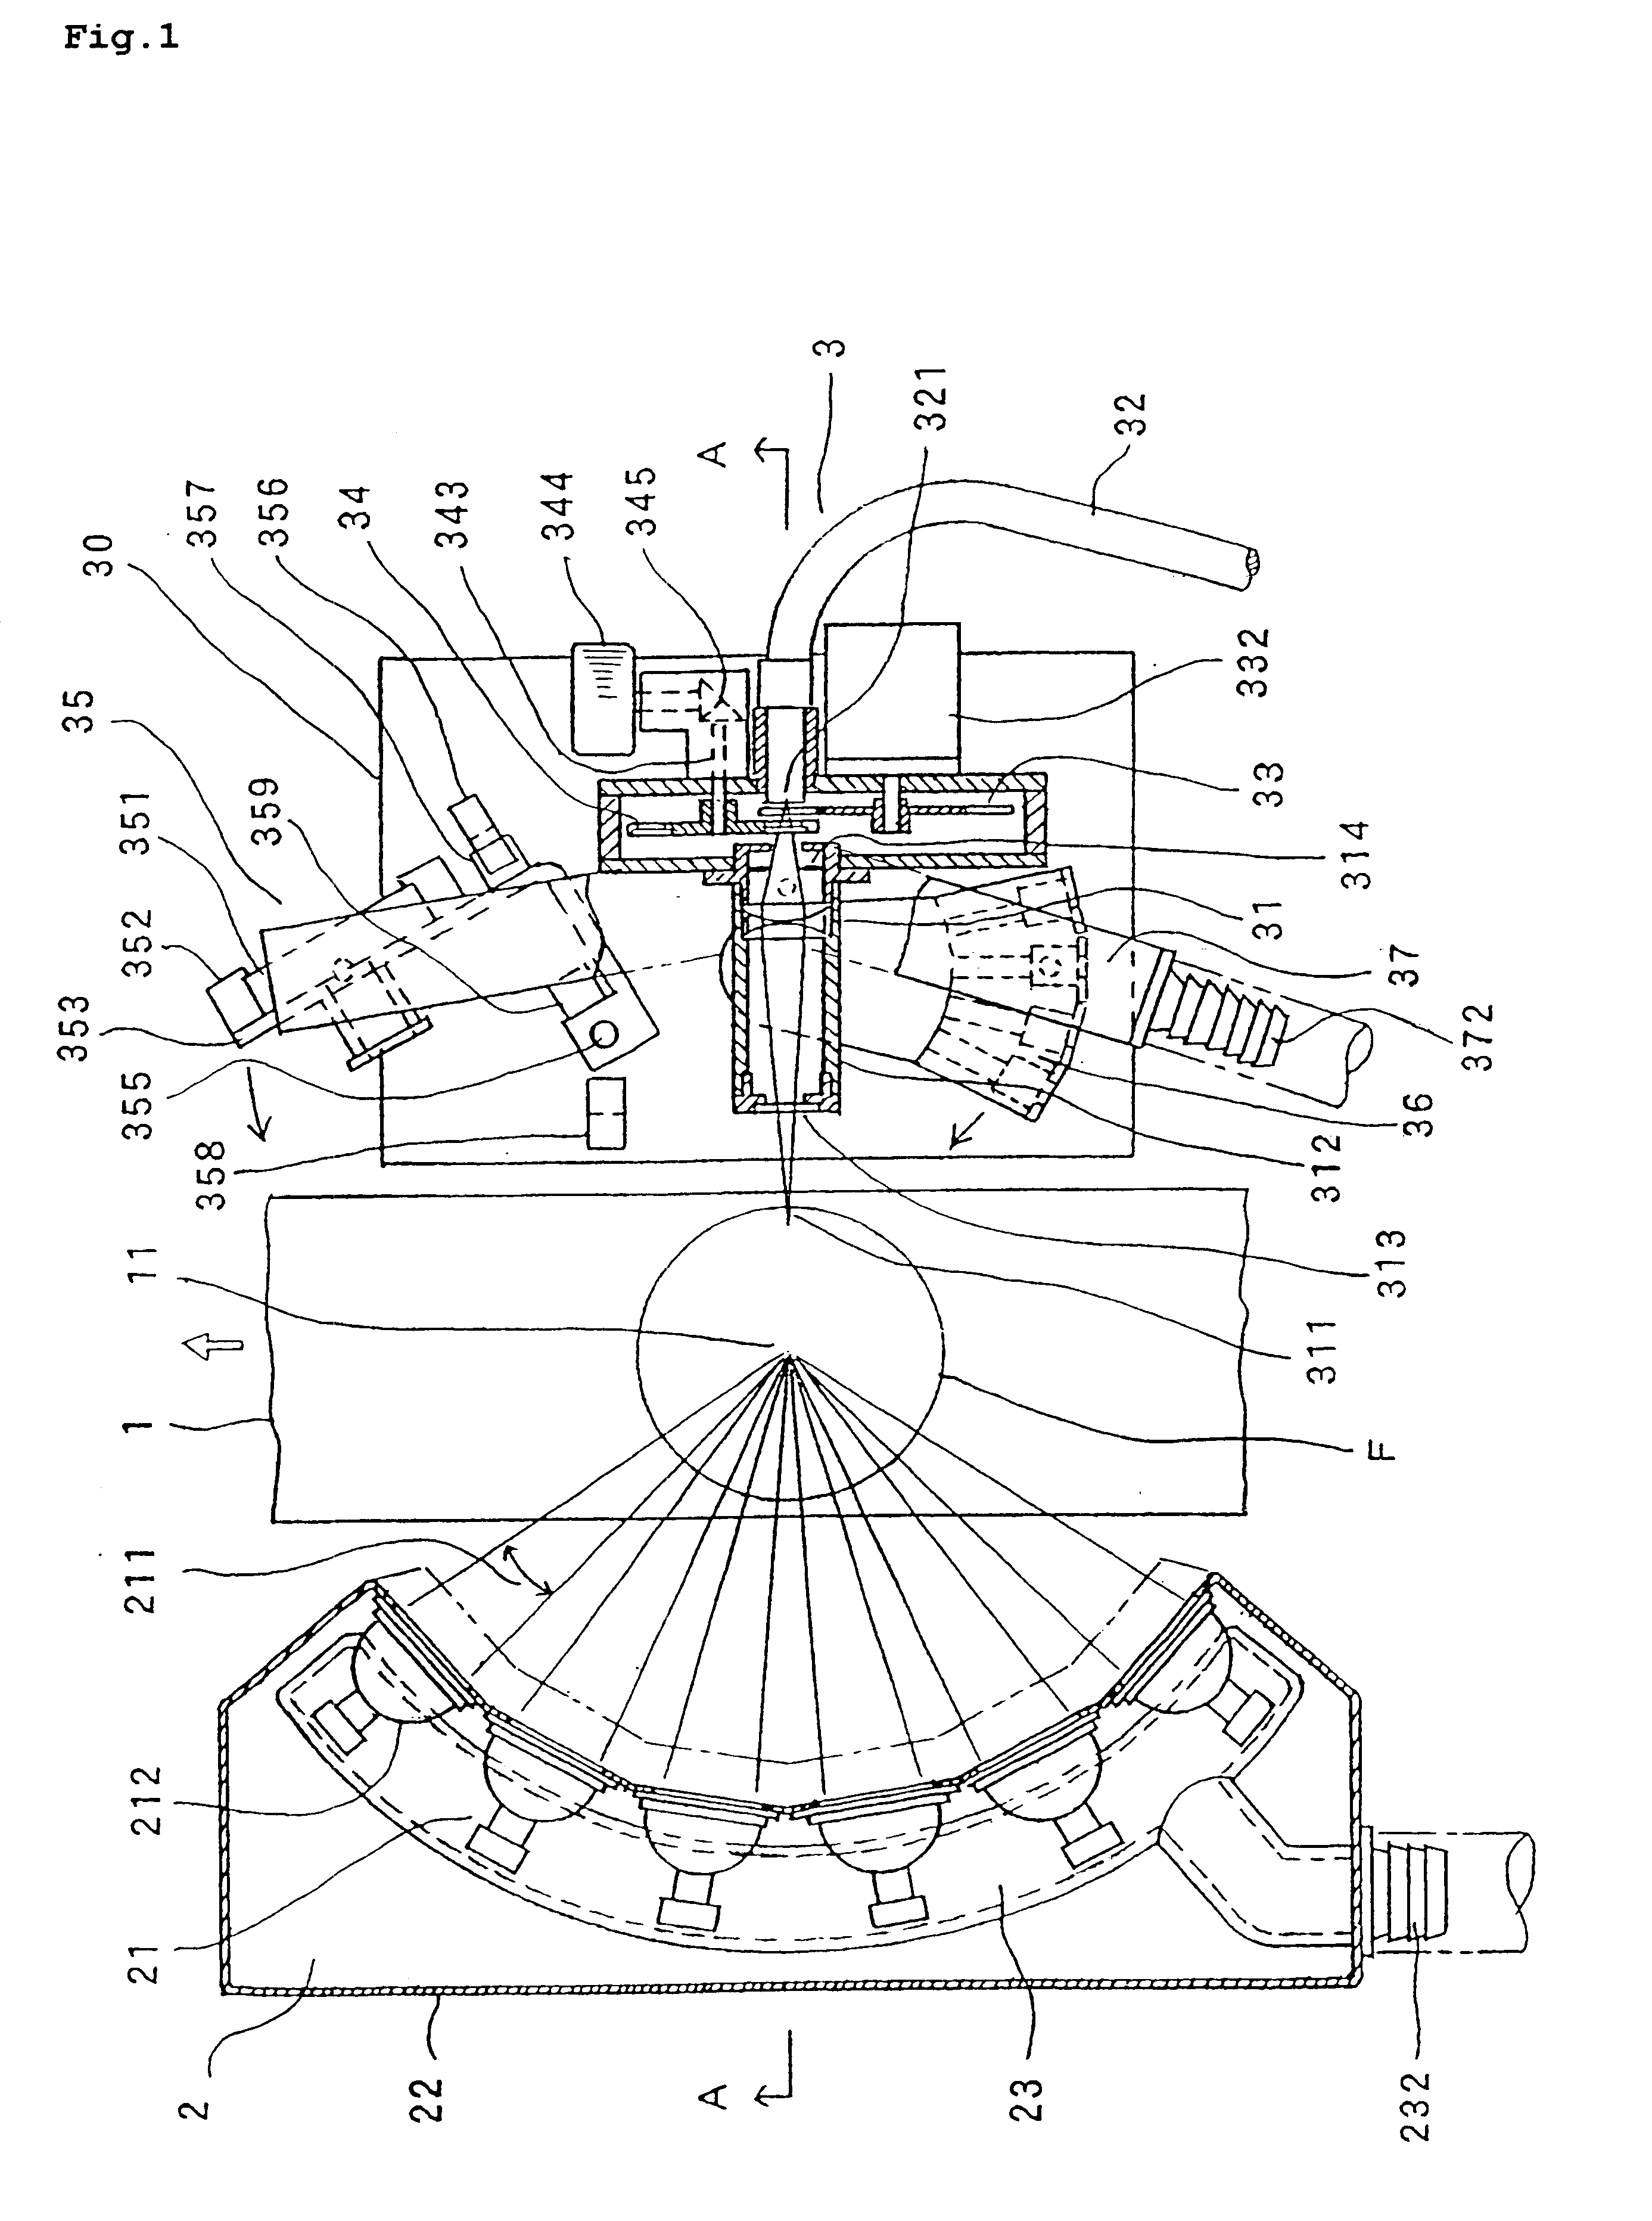 Side multiple-lamp type on-line inside quality inspecting device